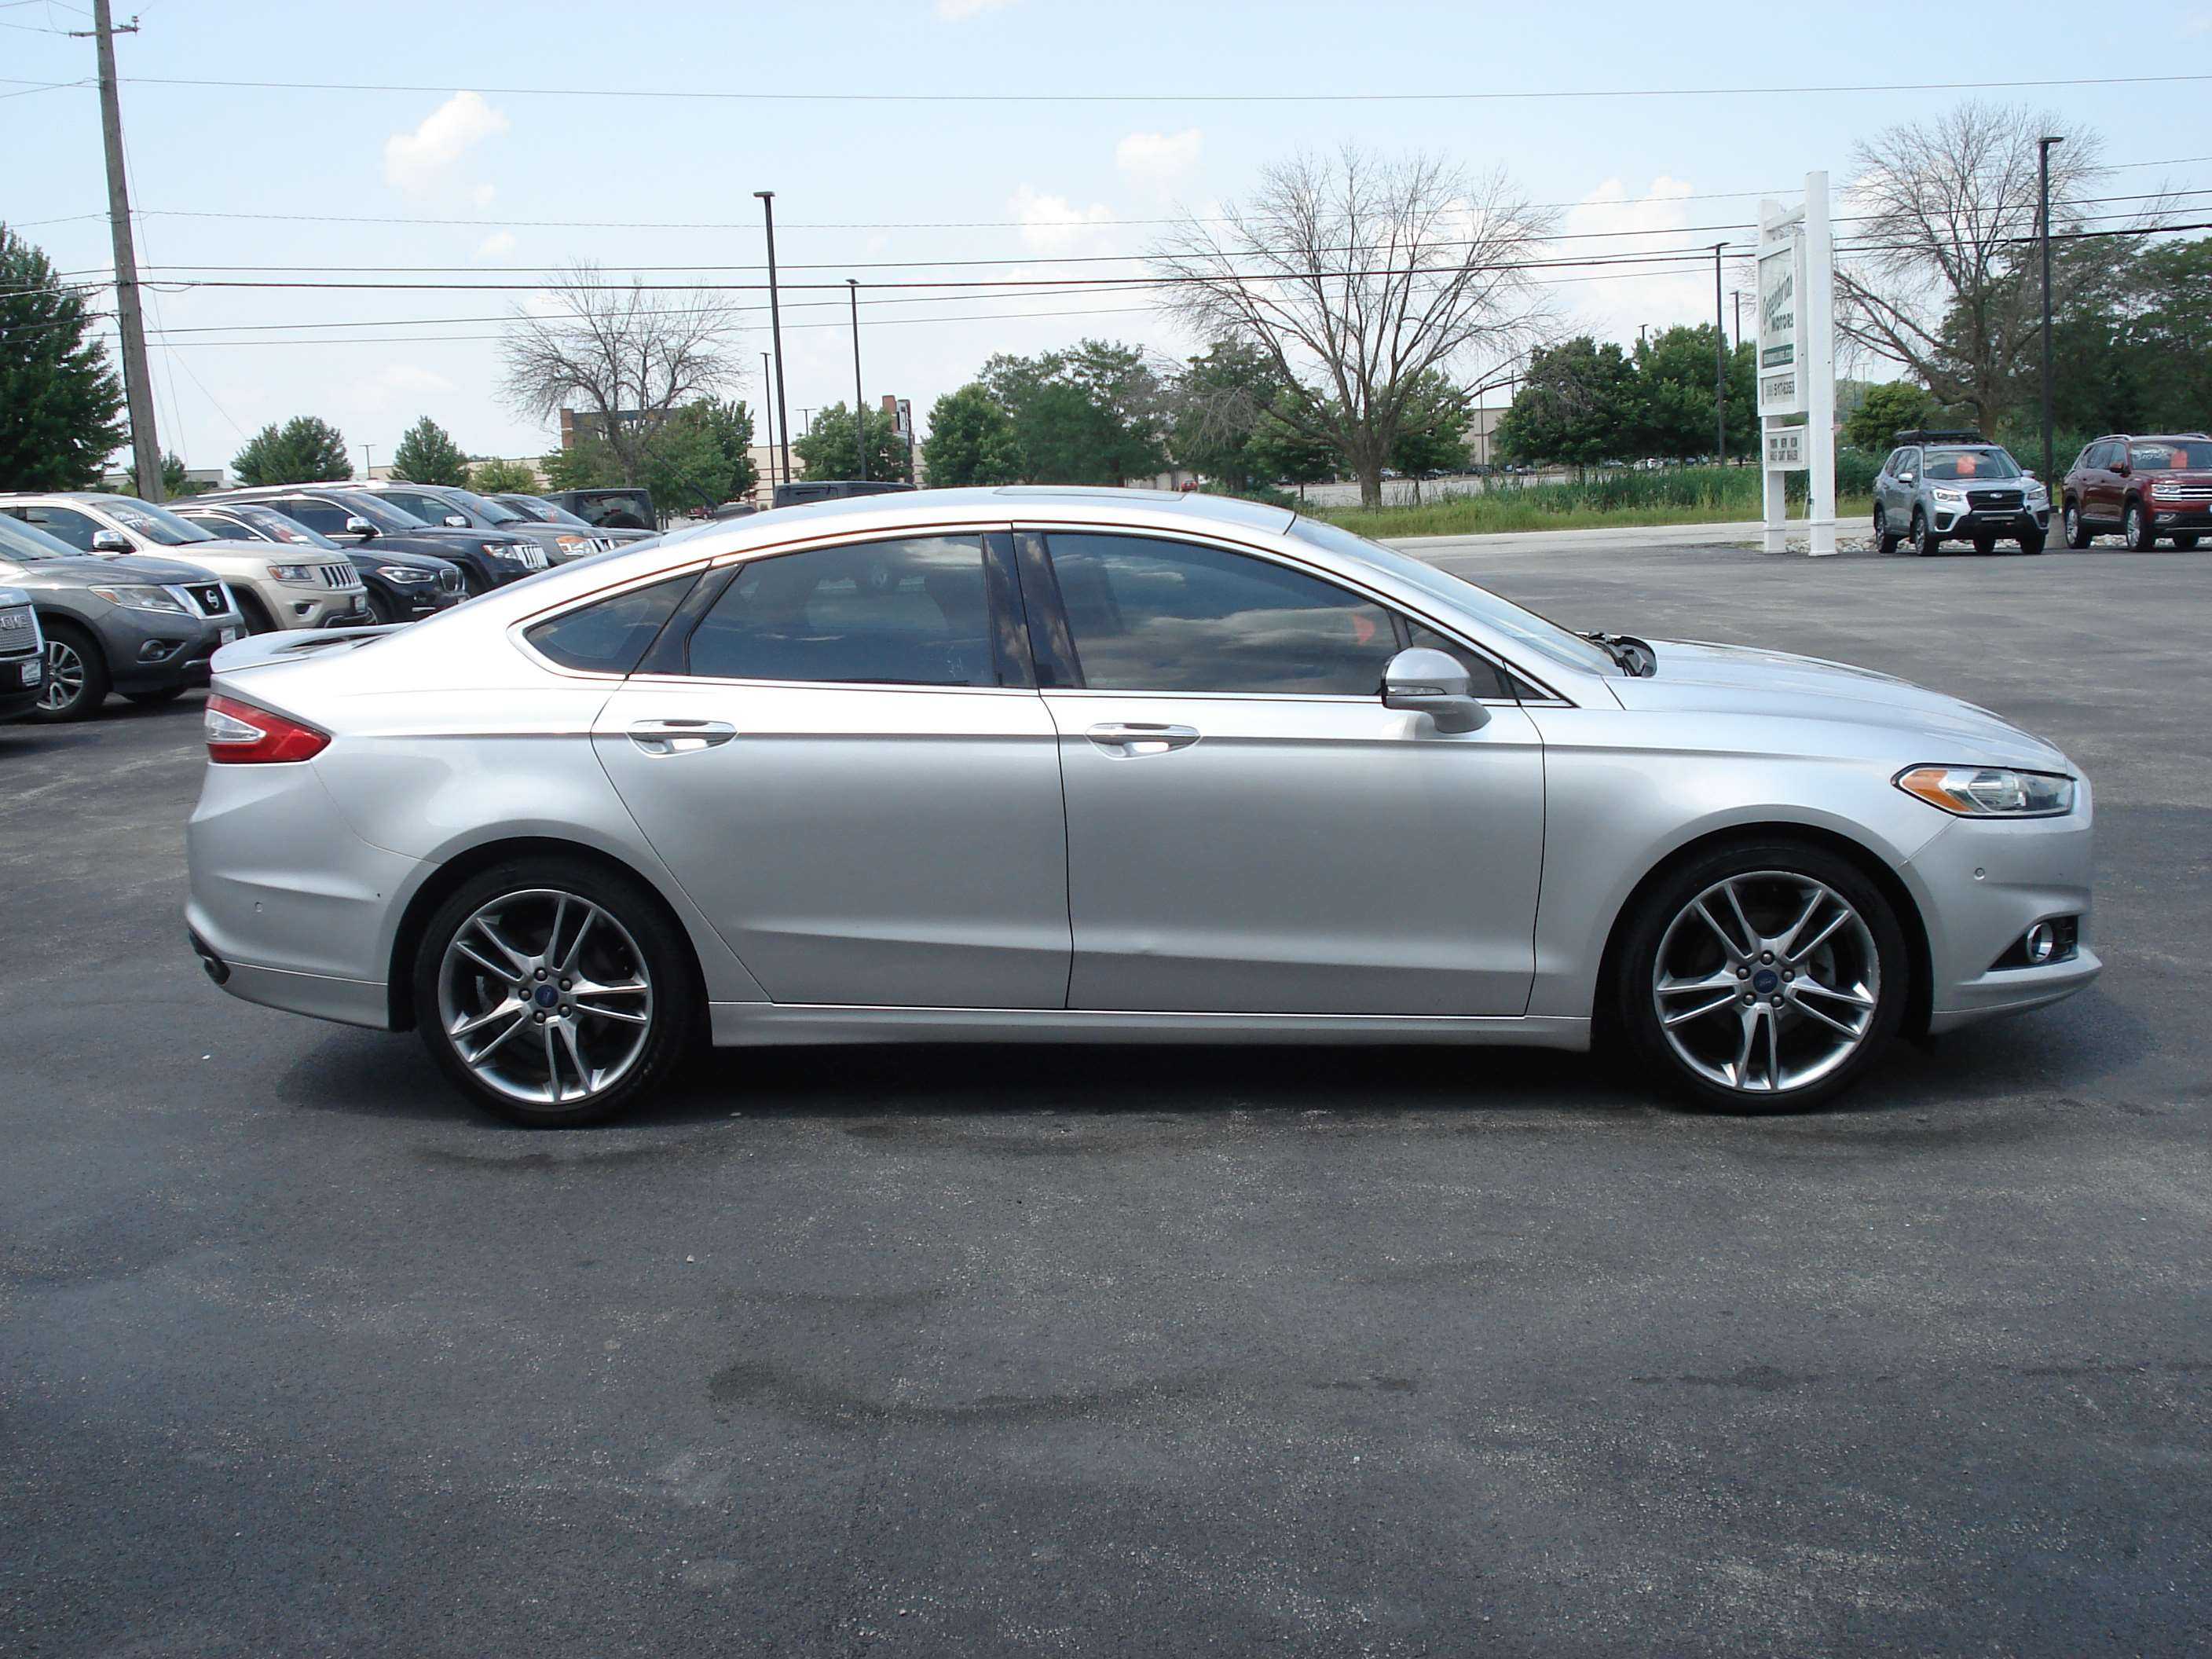 Ford Fusion Image 5